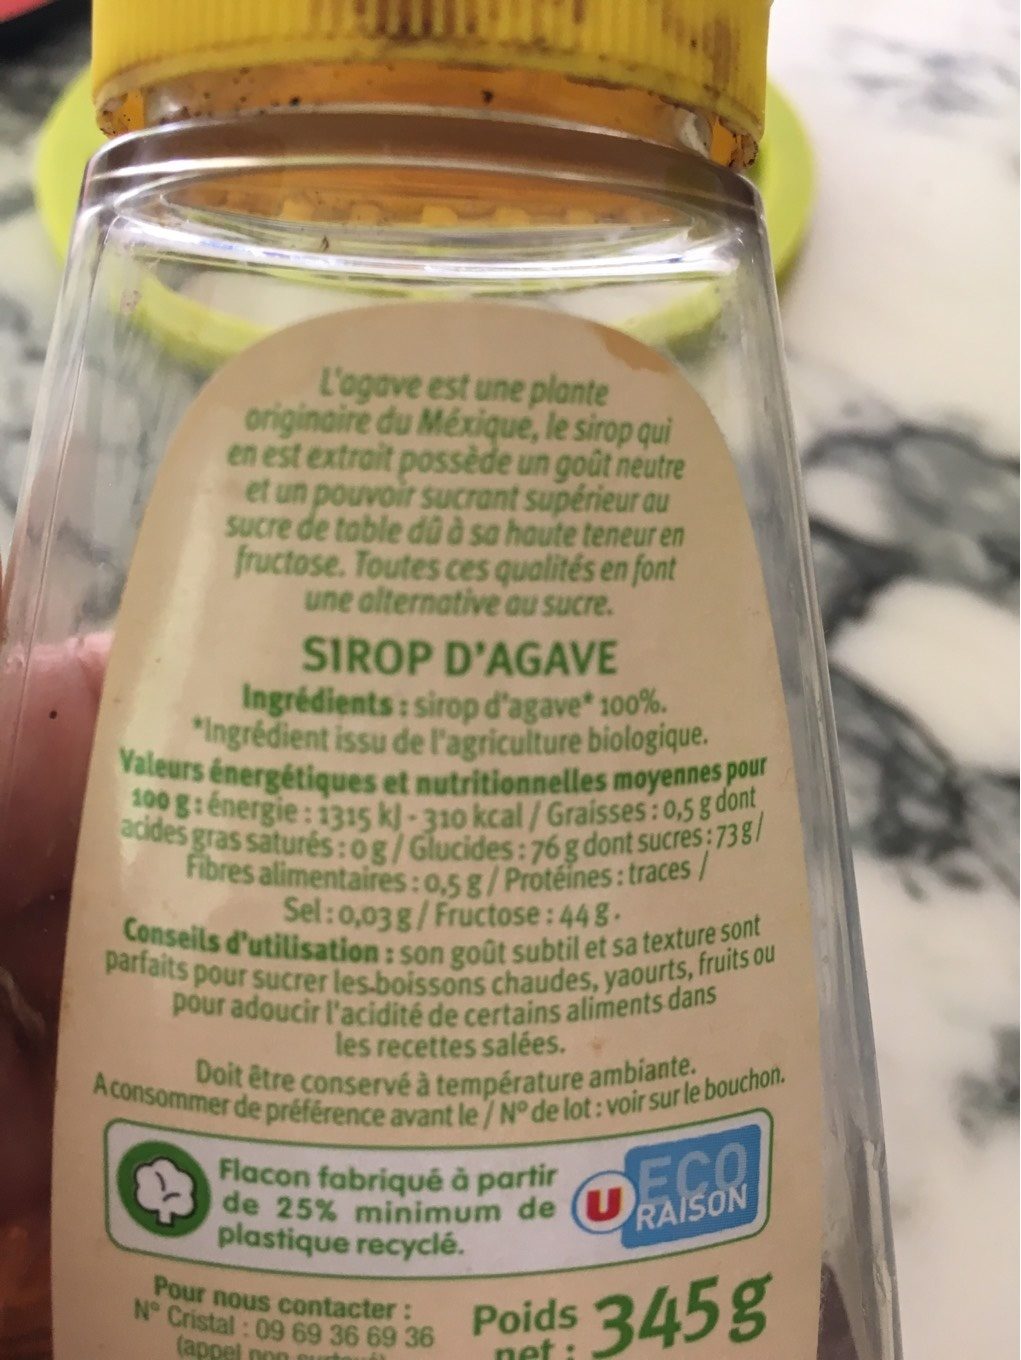 Sirop d'agave - Tableau nutritionnel